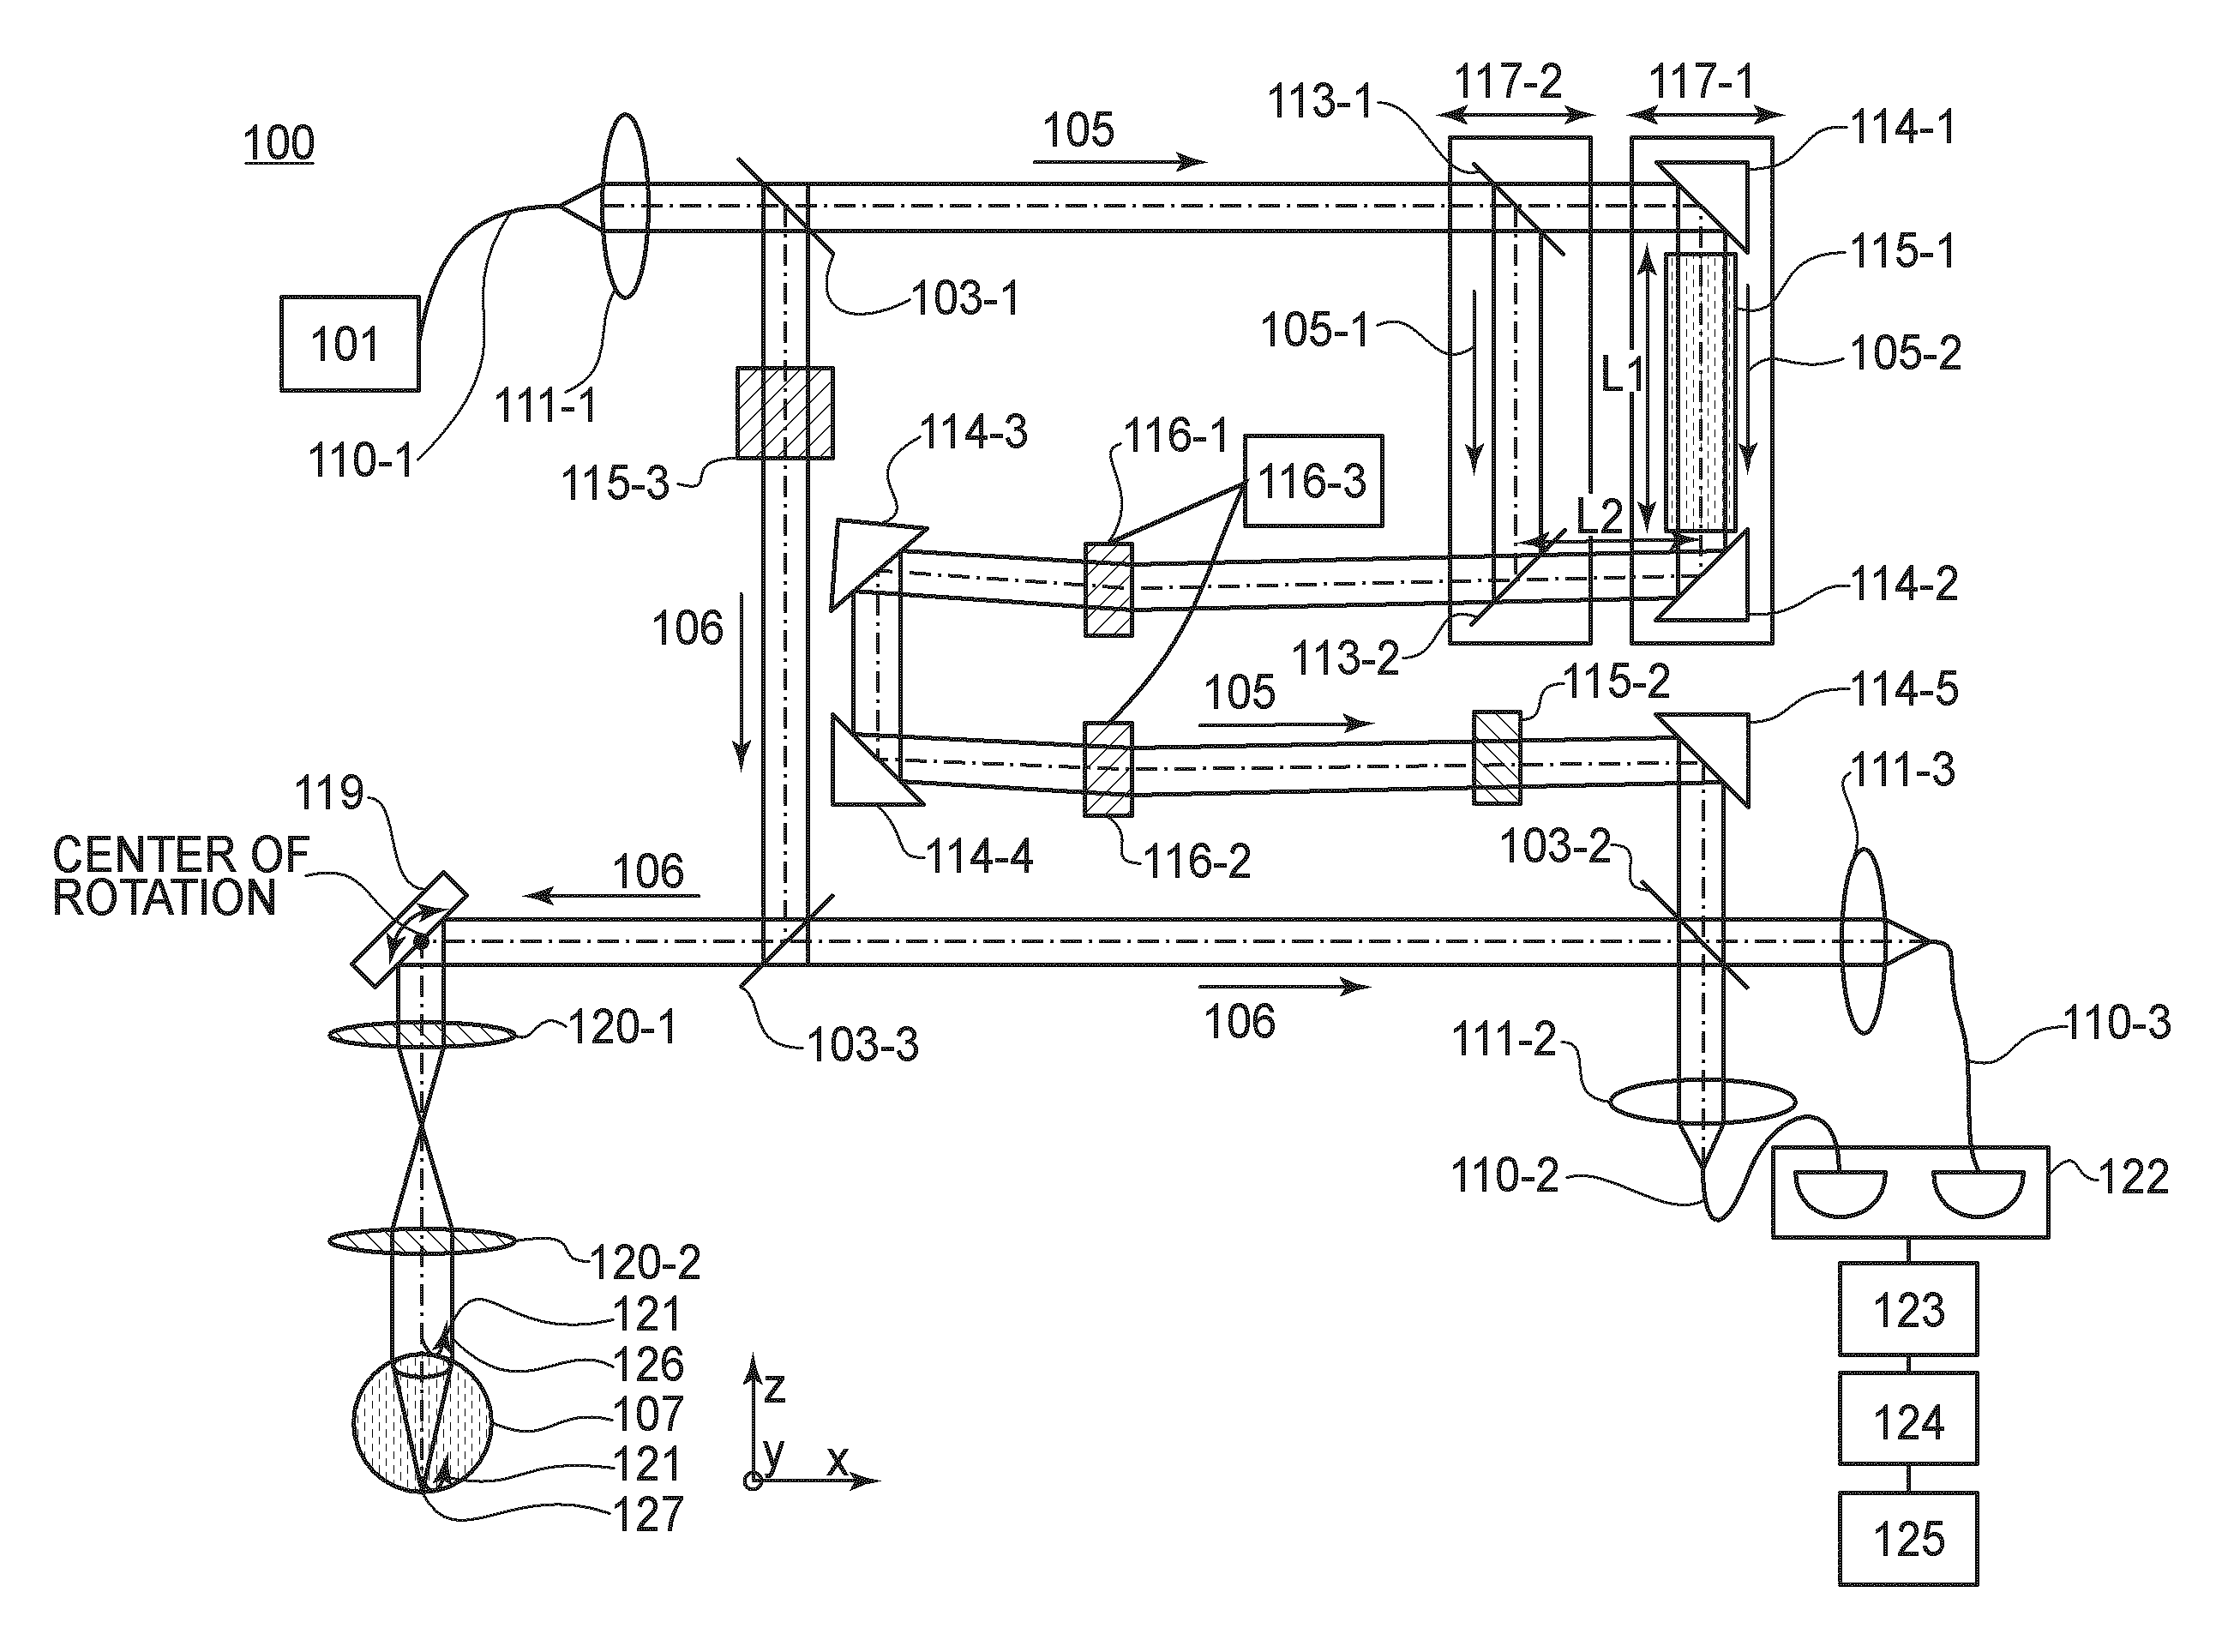 Optical coherence tomographic apparatus